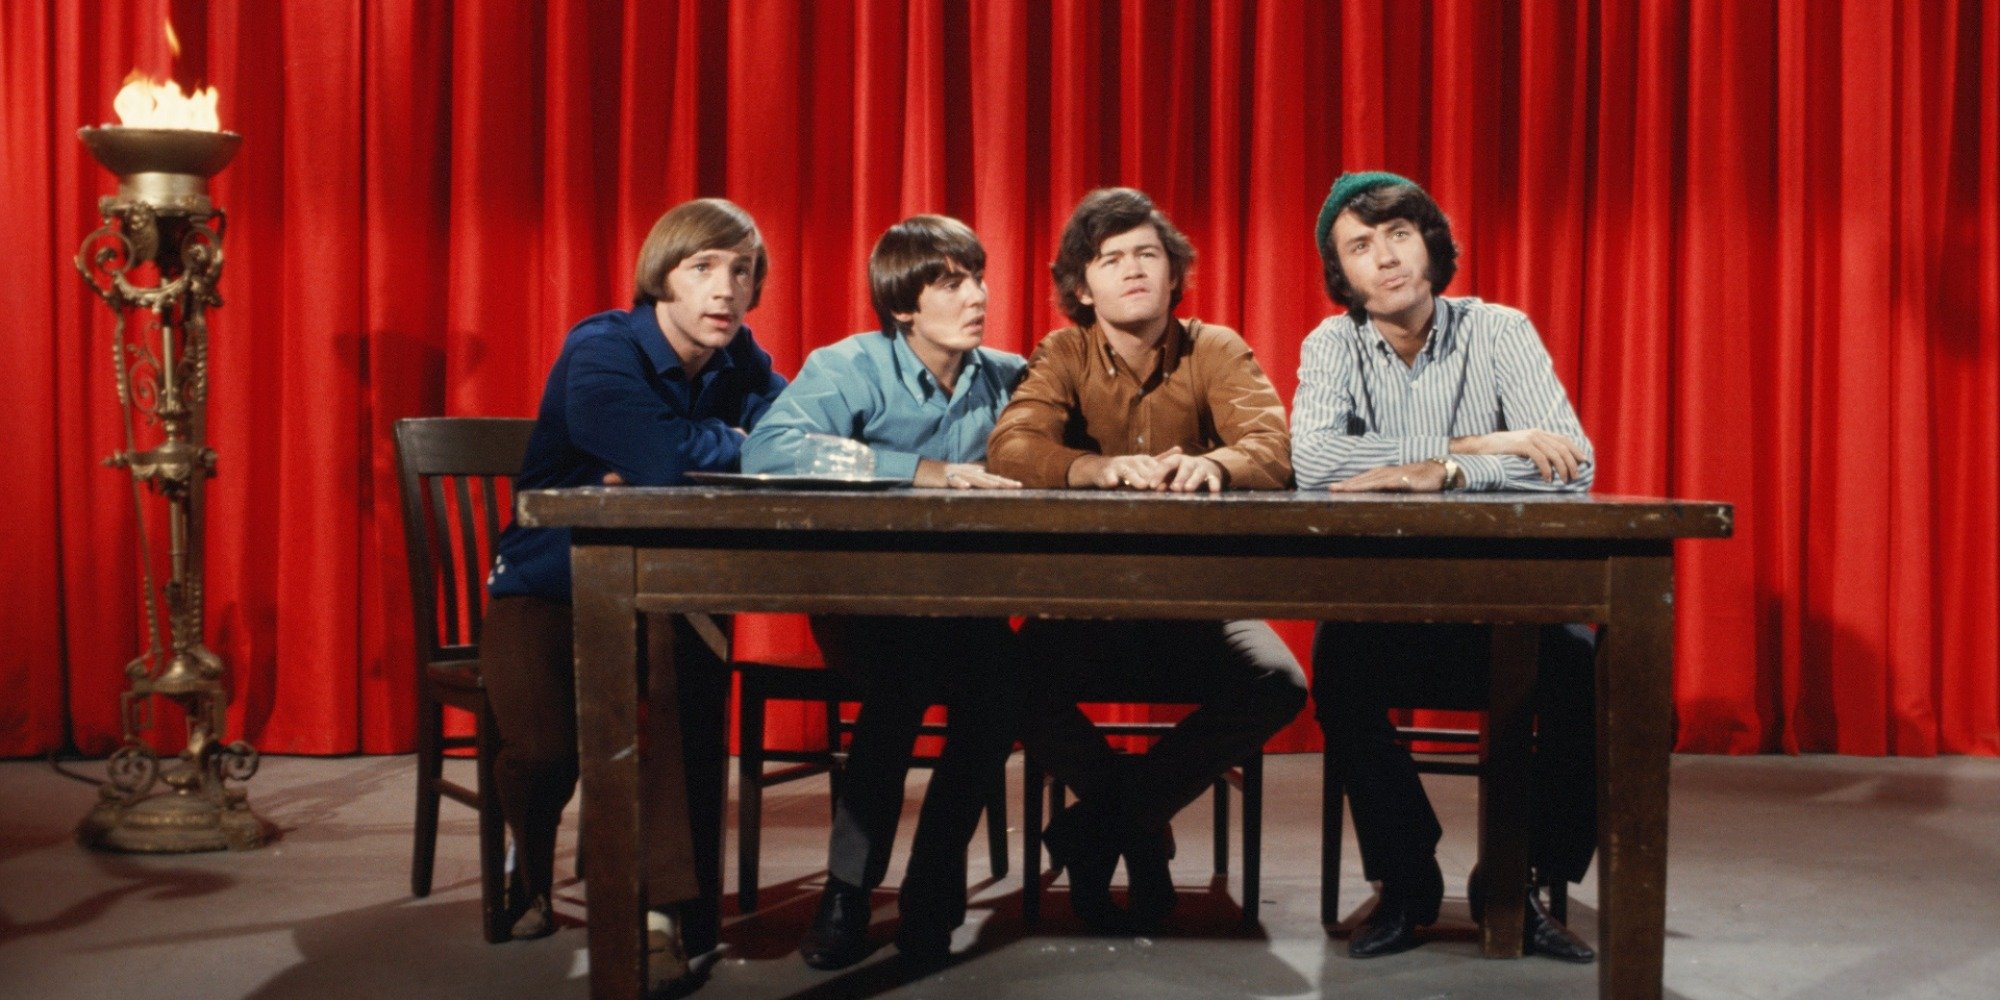 The Monkees on the set of The Devil and Peter Tork episode.